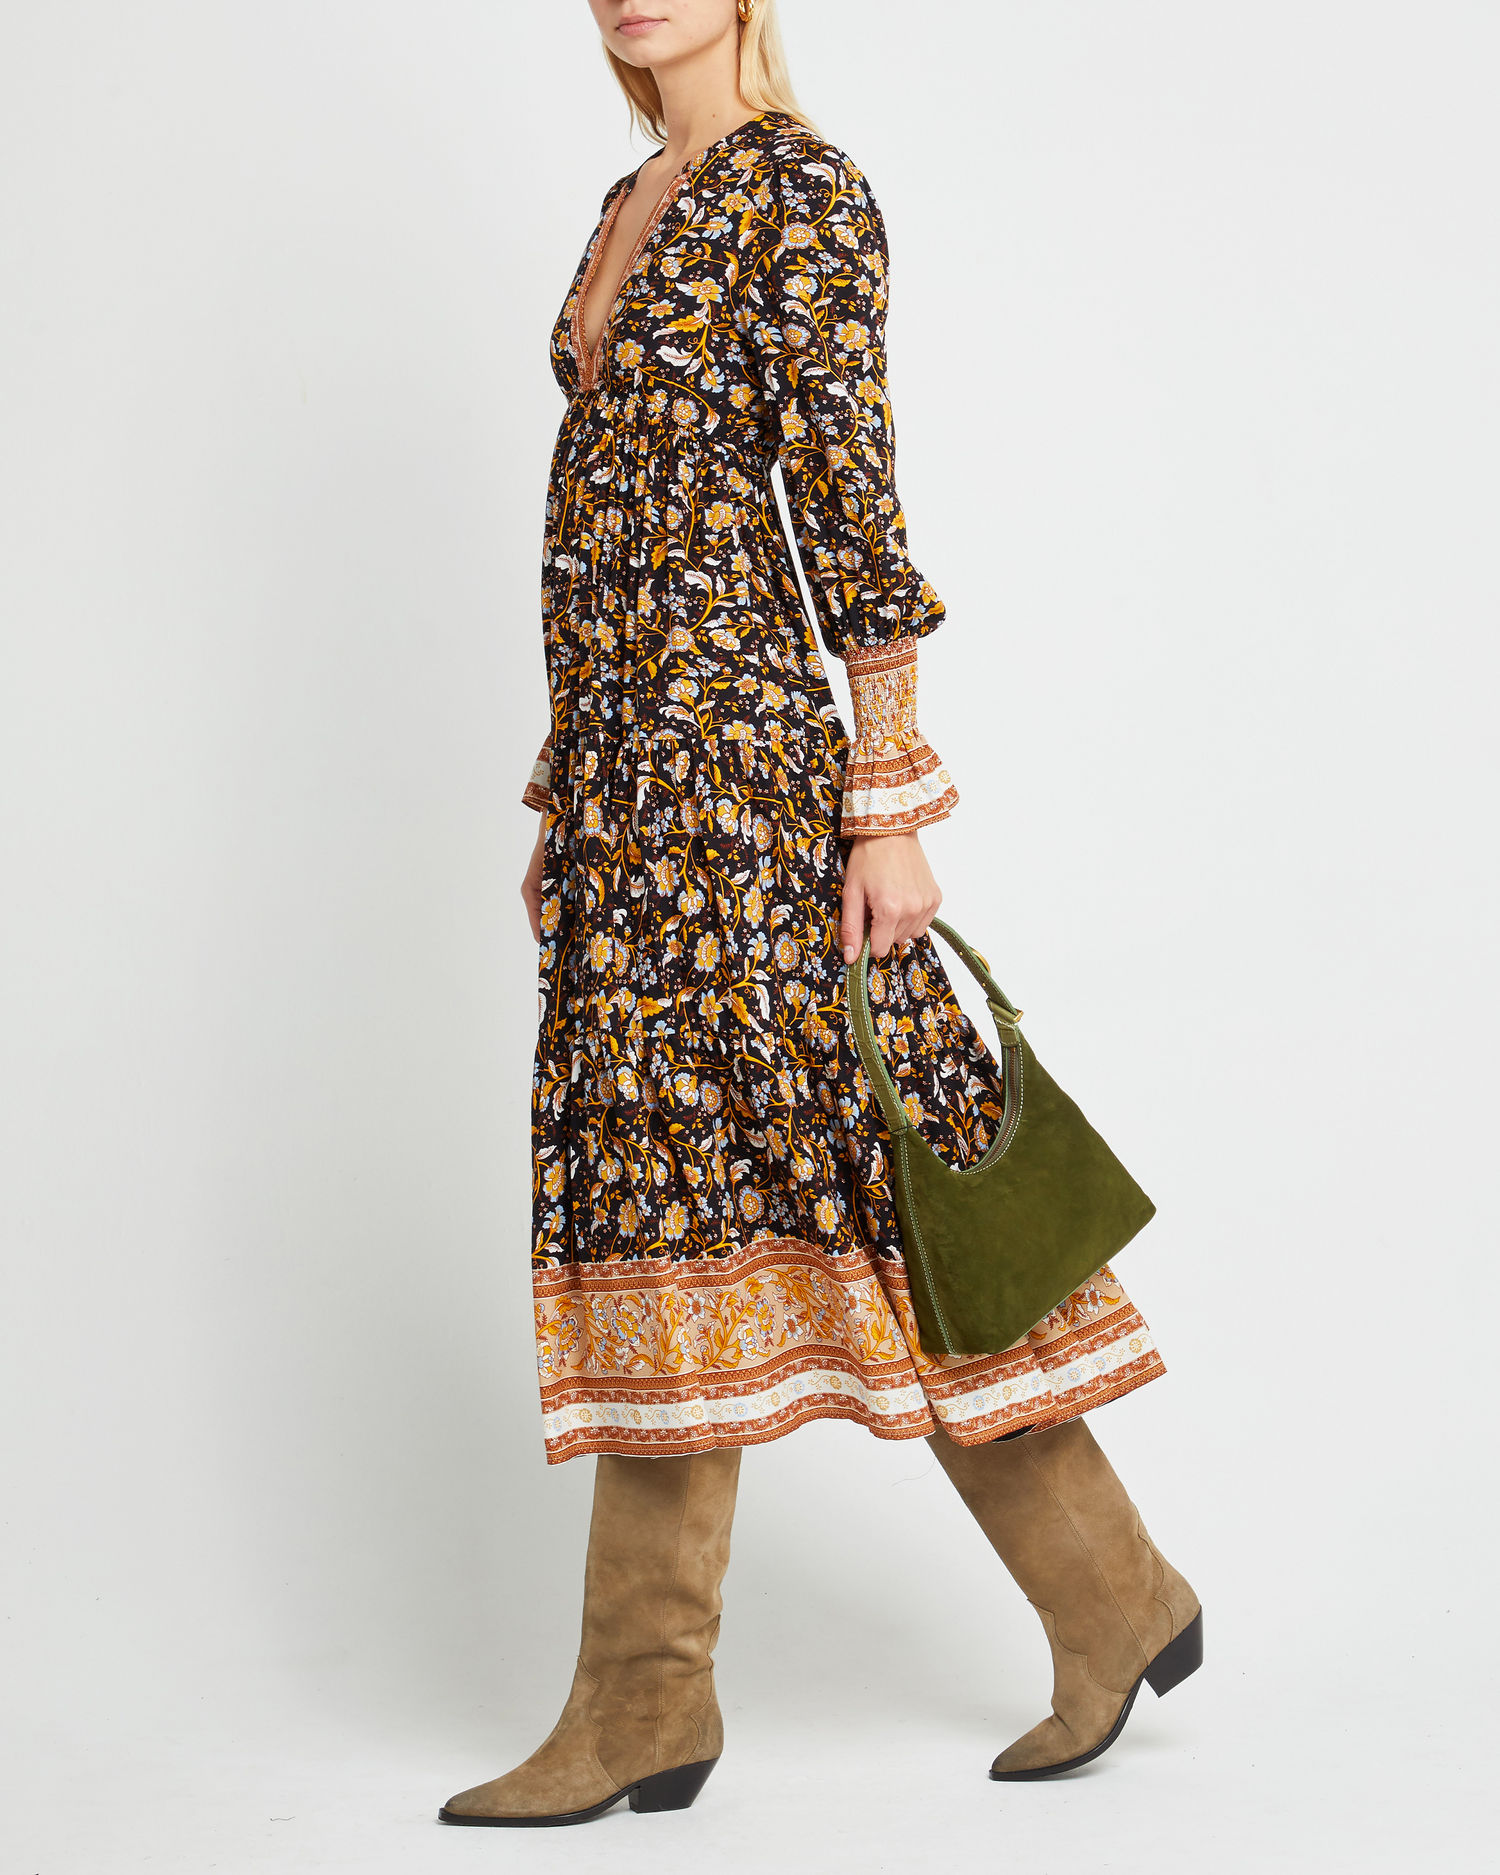 Third image of Zuri Dress, a yellow midi dress, long sleeve, fall, floral, V-neck, plunge